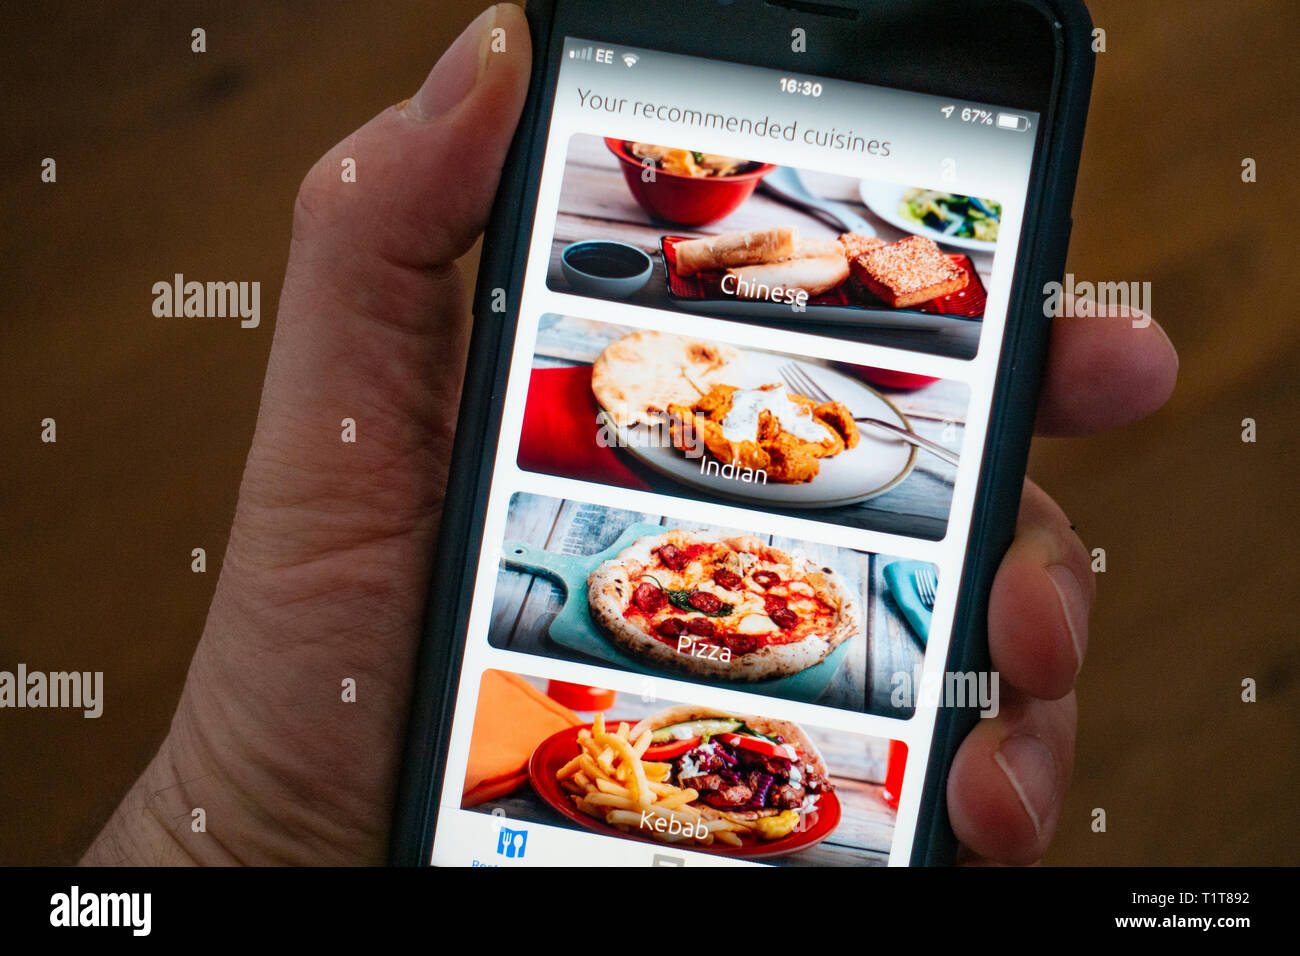 Using a mobile phone to use Just Eat food delivery app Stock Photo